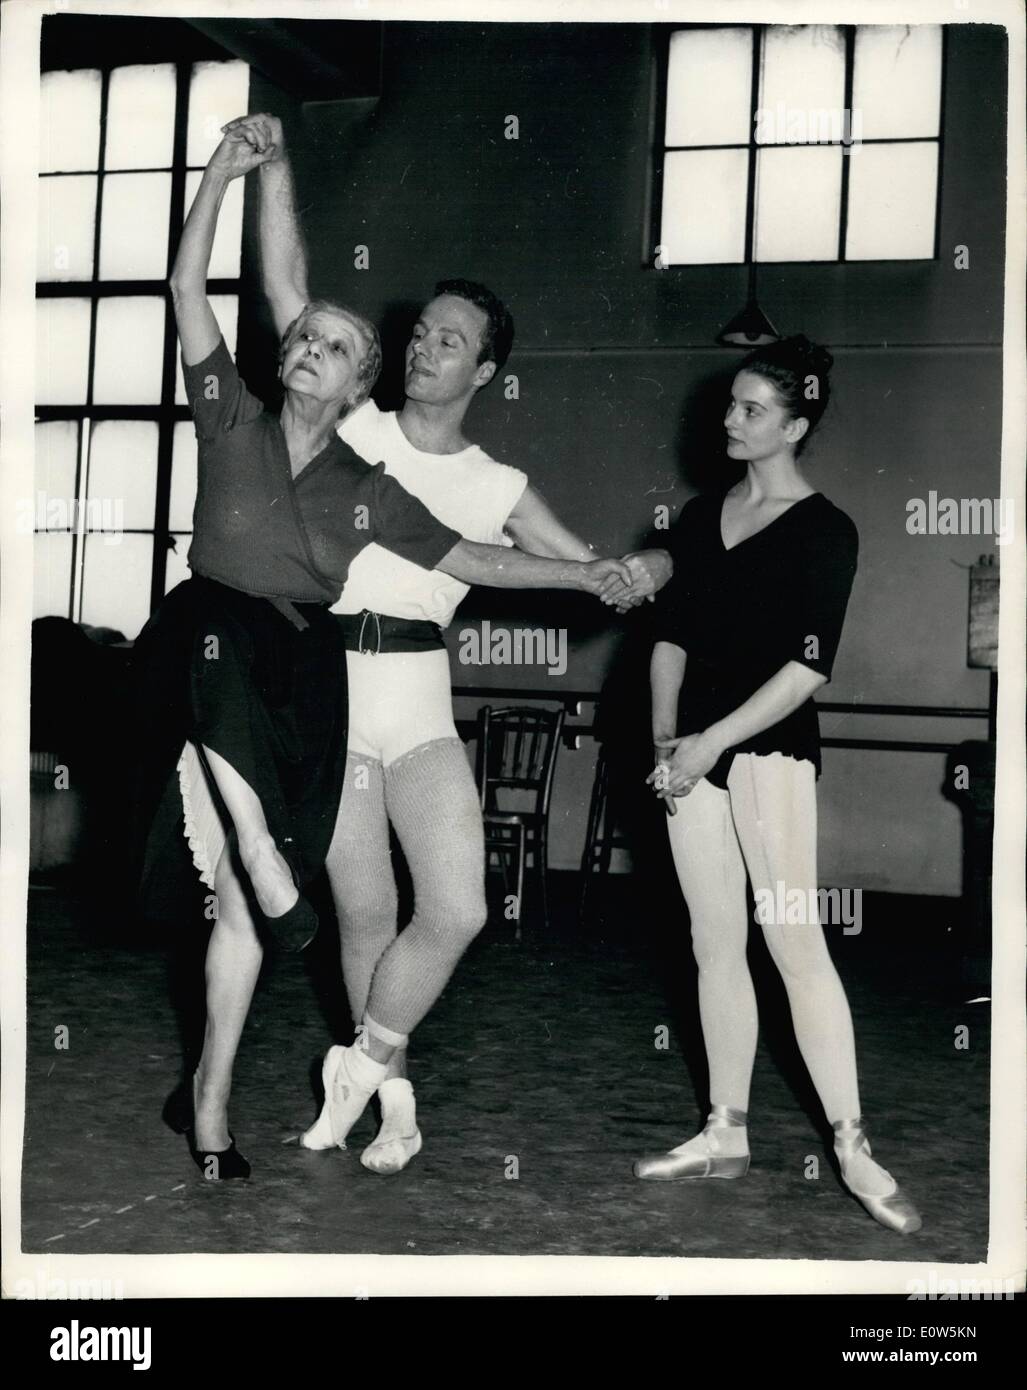 Sep. 09, 1961 - Seventy -year-old Former Ballet Star Teaches John Gilpin the Role of Harlequin: 70-year-old Madame Tamara Karsavina, former ballet ''Le Garnaval'' to teach John Gilpin to dance the role of Harlequin. The Ballet will be performed by the Western Theater Ballet on Thursday Sept. 14th, at Sadler's Wells Theater. ''Le Garnaval'' was originally created in 1910 and was first performed by the Diaghilev Company when Harlequin was danced by NIjinaky and Columbine by Madame Karsavina Stock Photo